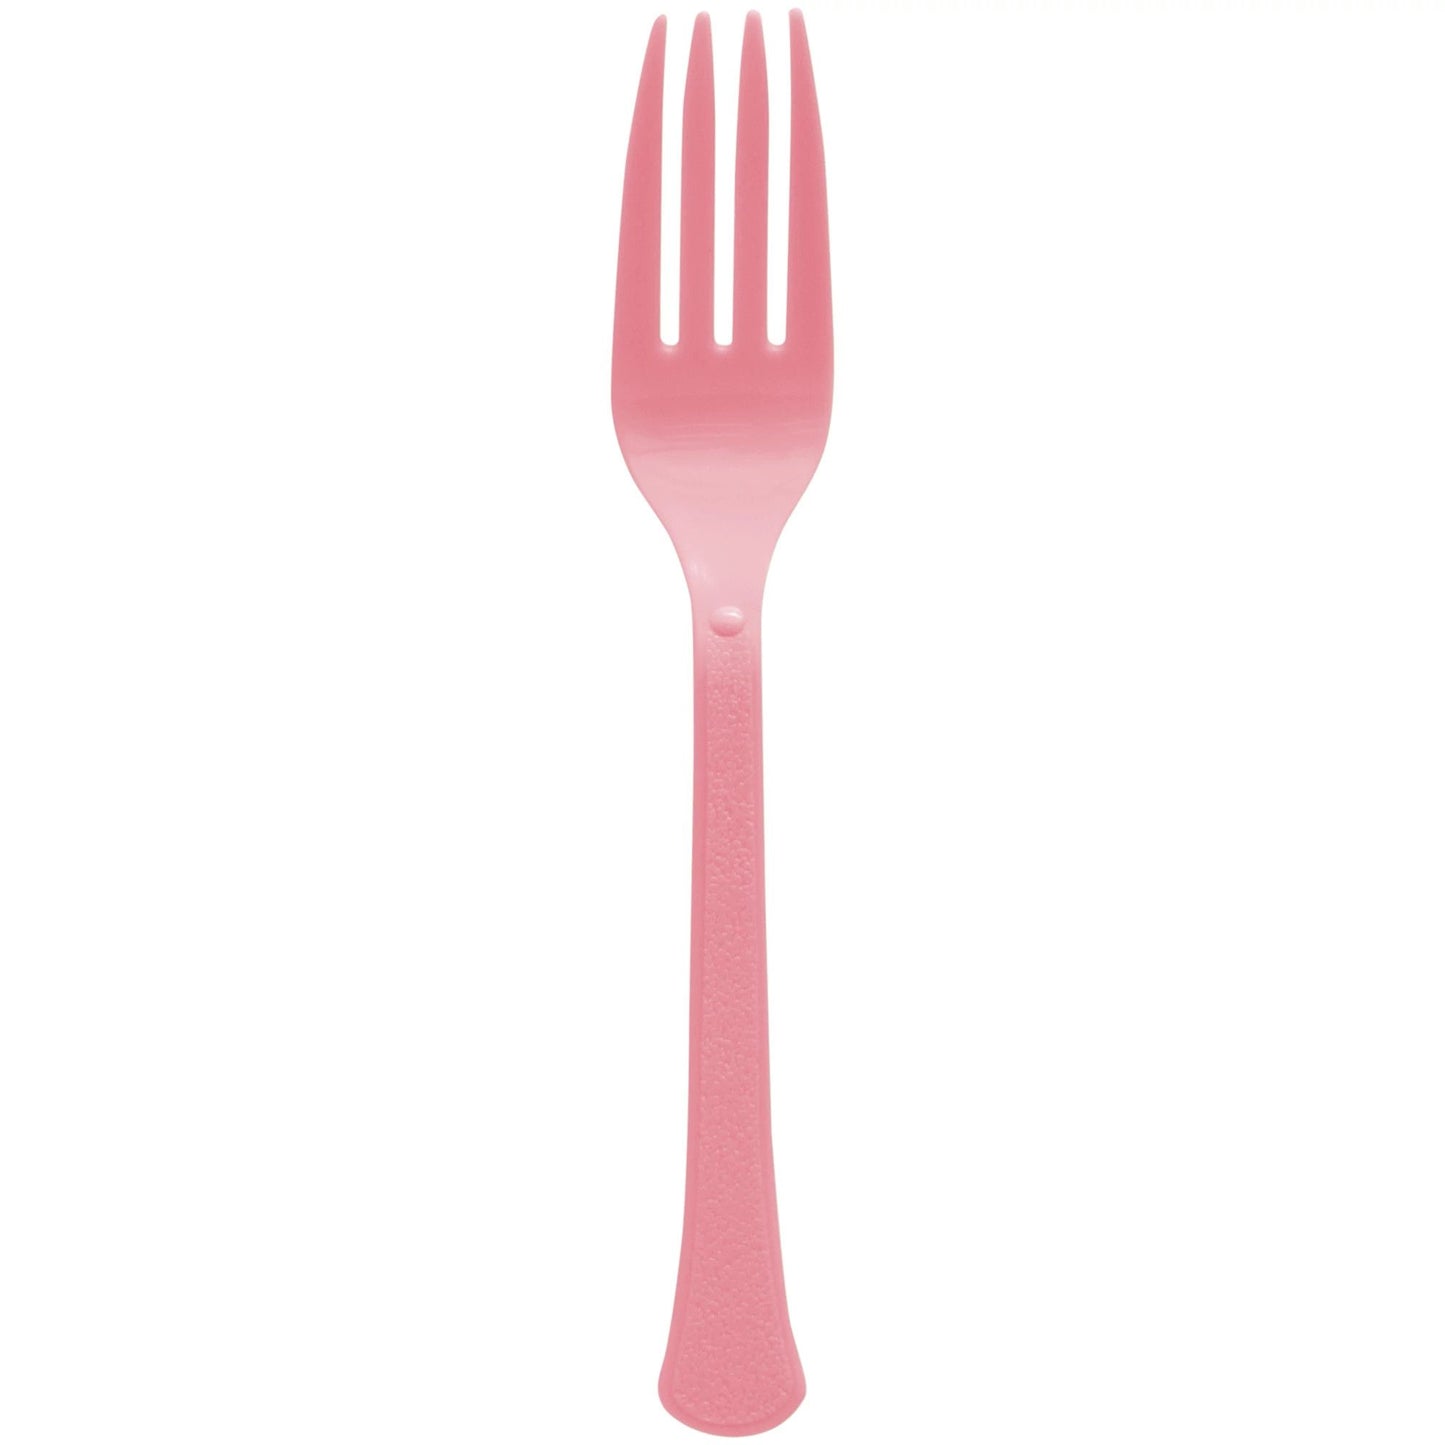 Reusable Plastic Forks, High Ct. - New Pink 50ct